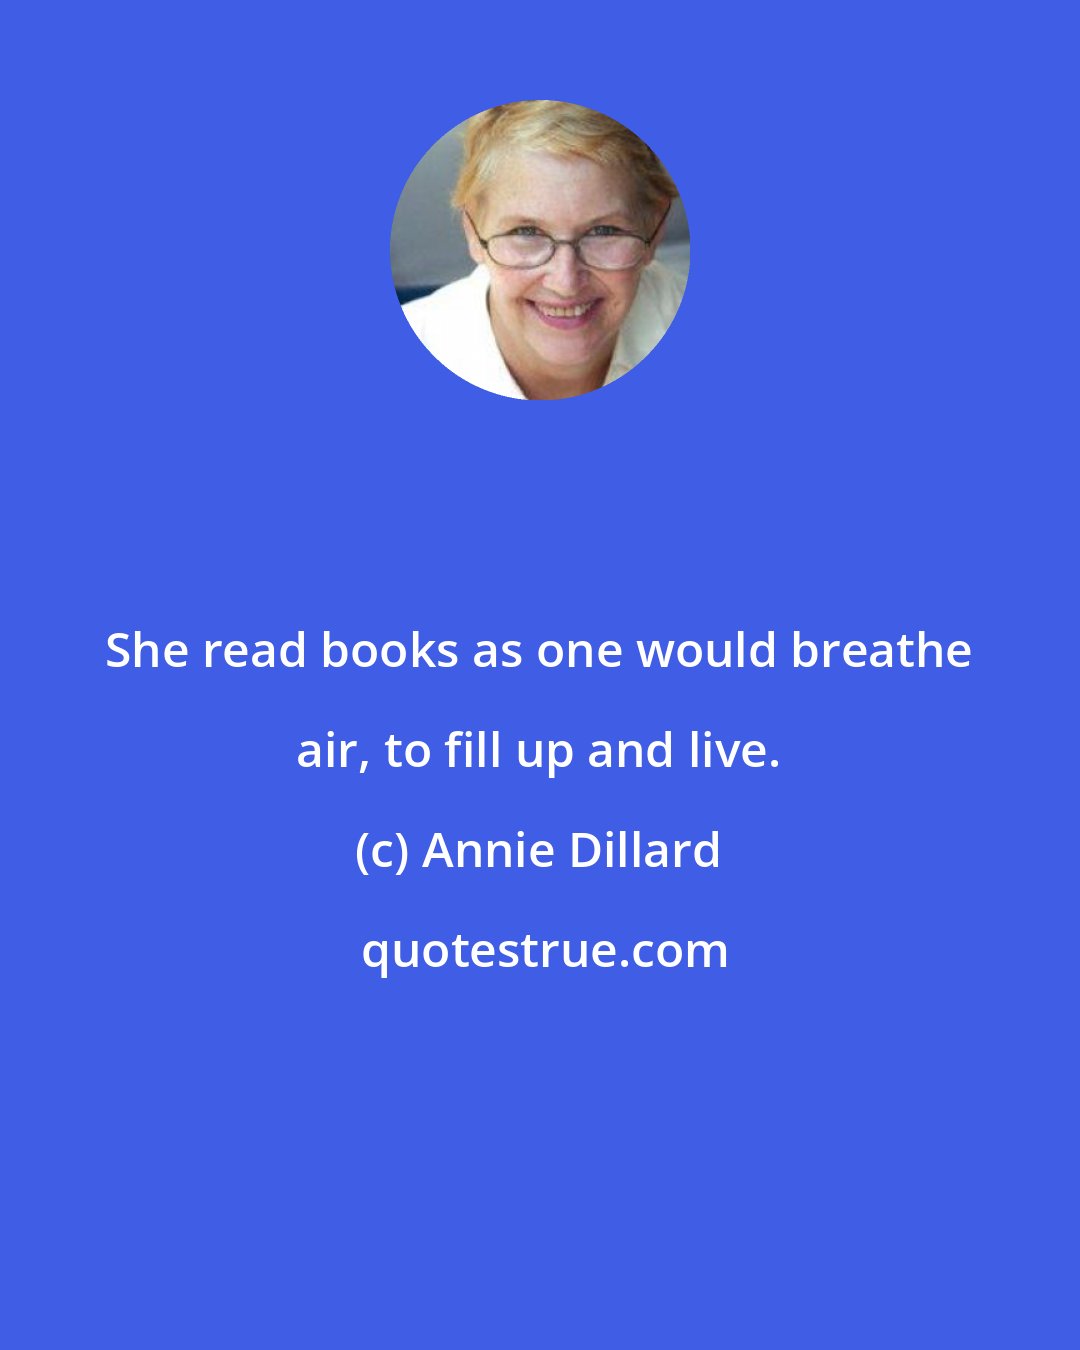 Annie Dillard: She read books as one would breathe air, to fill up and live.